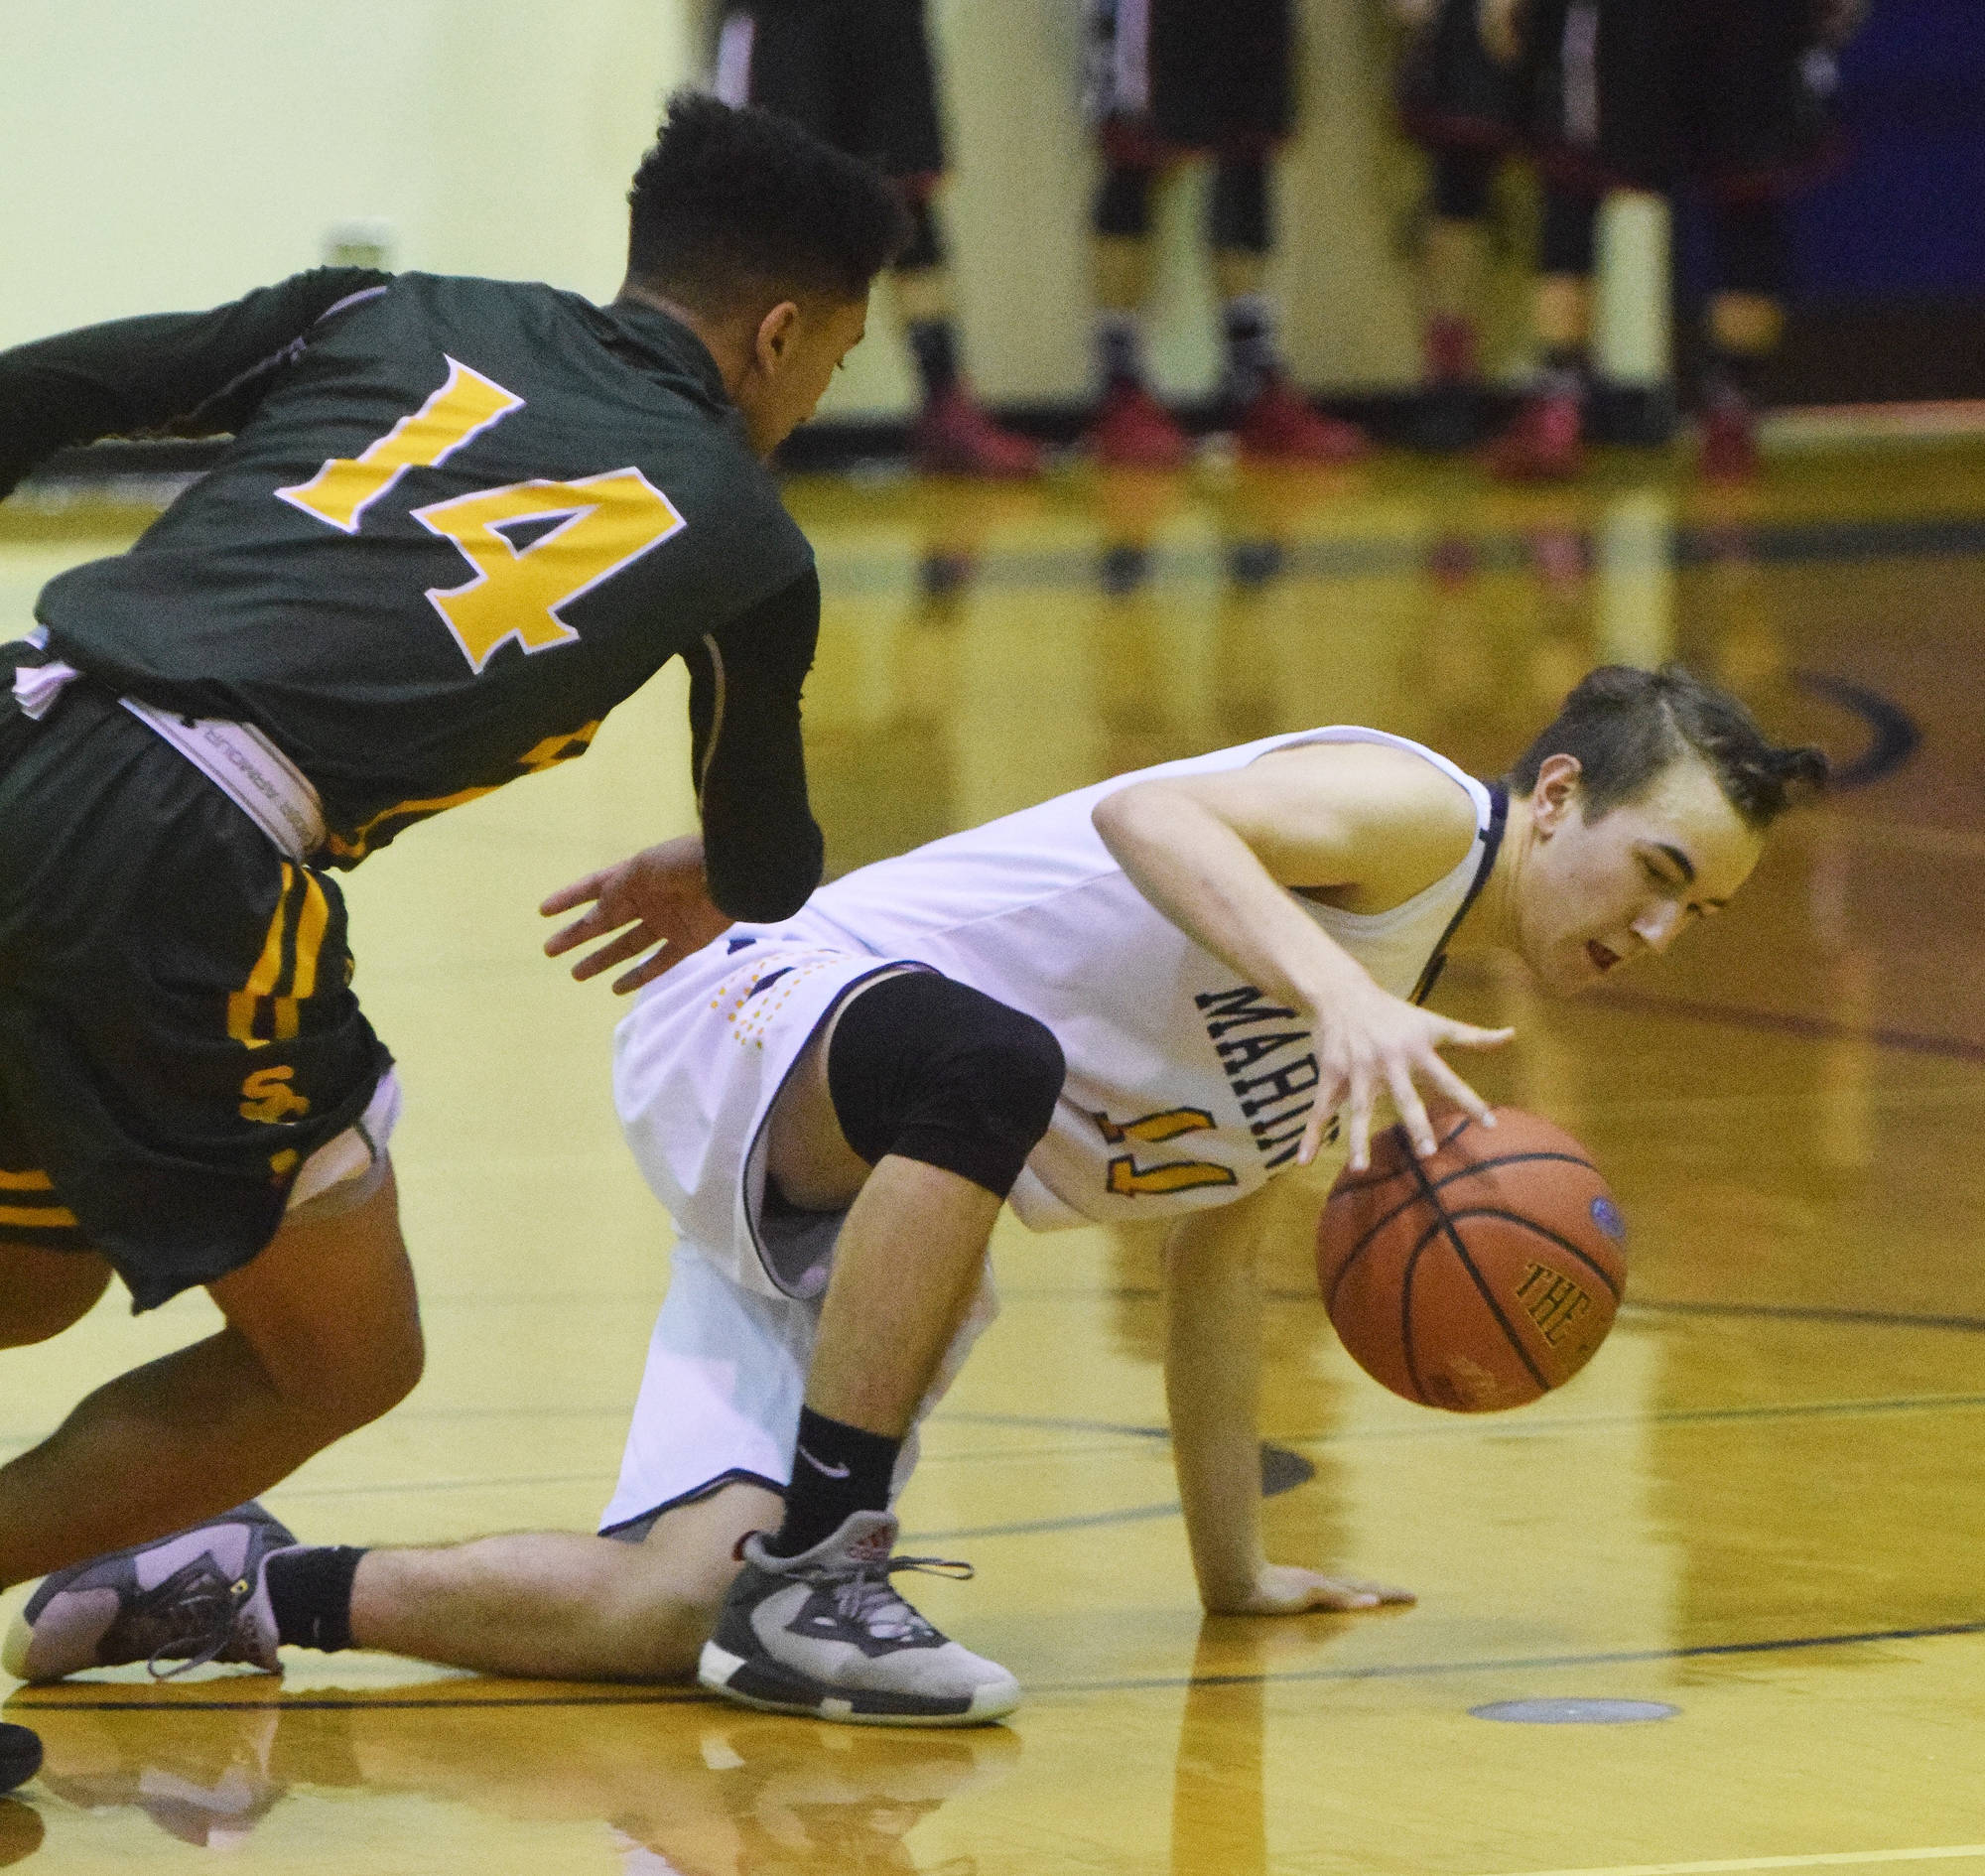 Homer’s Daniel Reutov slips while dribbling the ball with pressure from Service’s Brandon Gail (14) Dec. 15, 2017, at the Powerade/Al Howard Tip-Off tournament at Soldotna High School. (Photo by Joey Klecka/Peninsula Clarion)